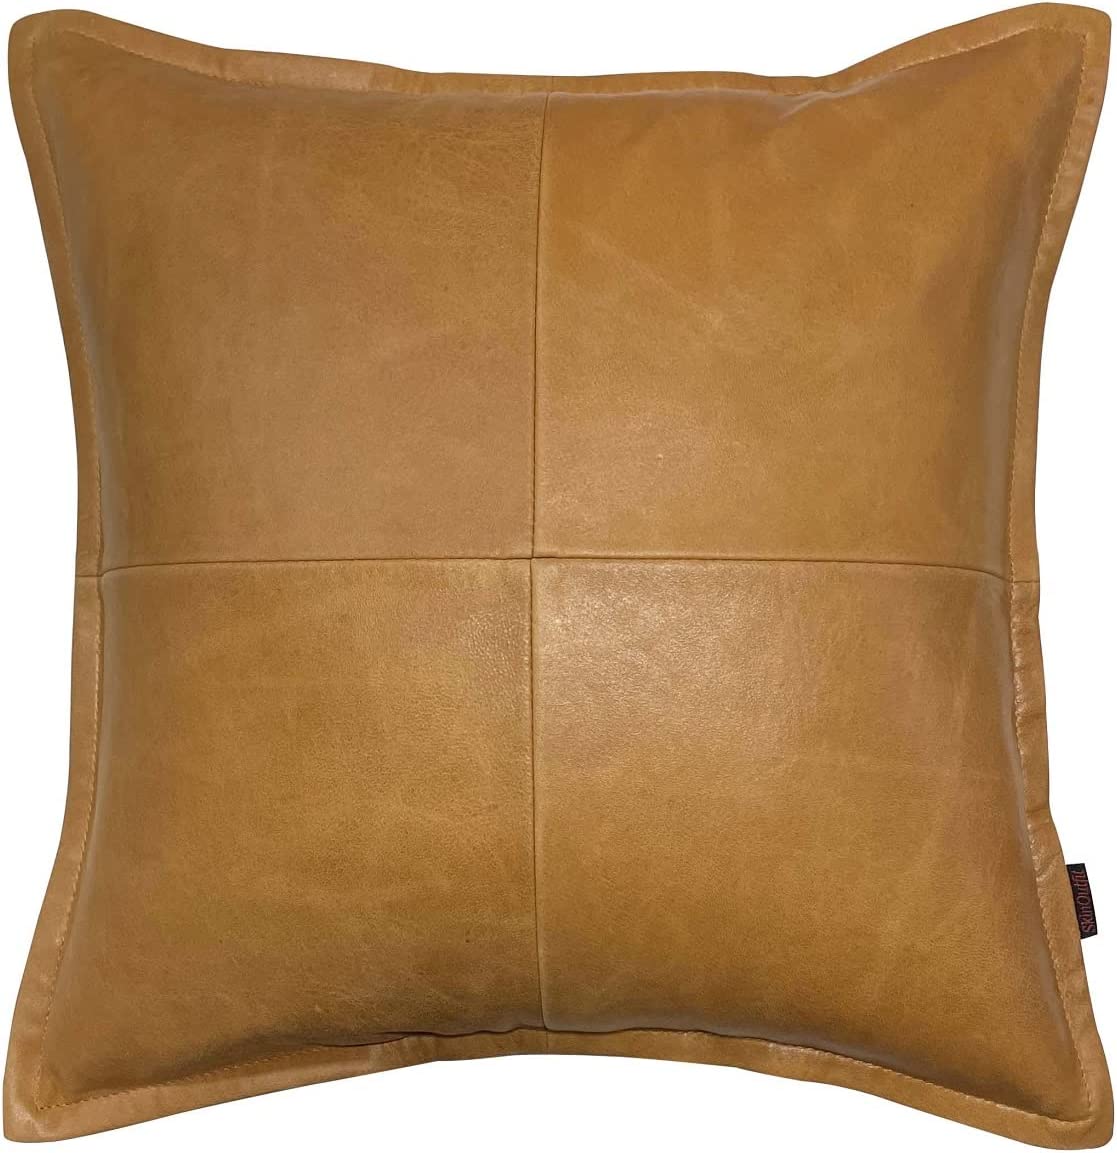 Genuine Leather Square Pillow Cover 15 SkinOutfit